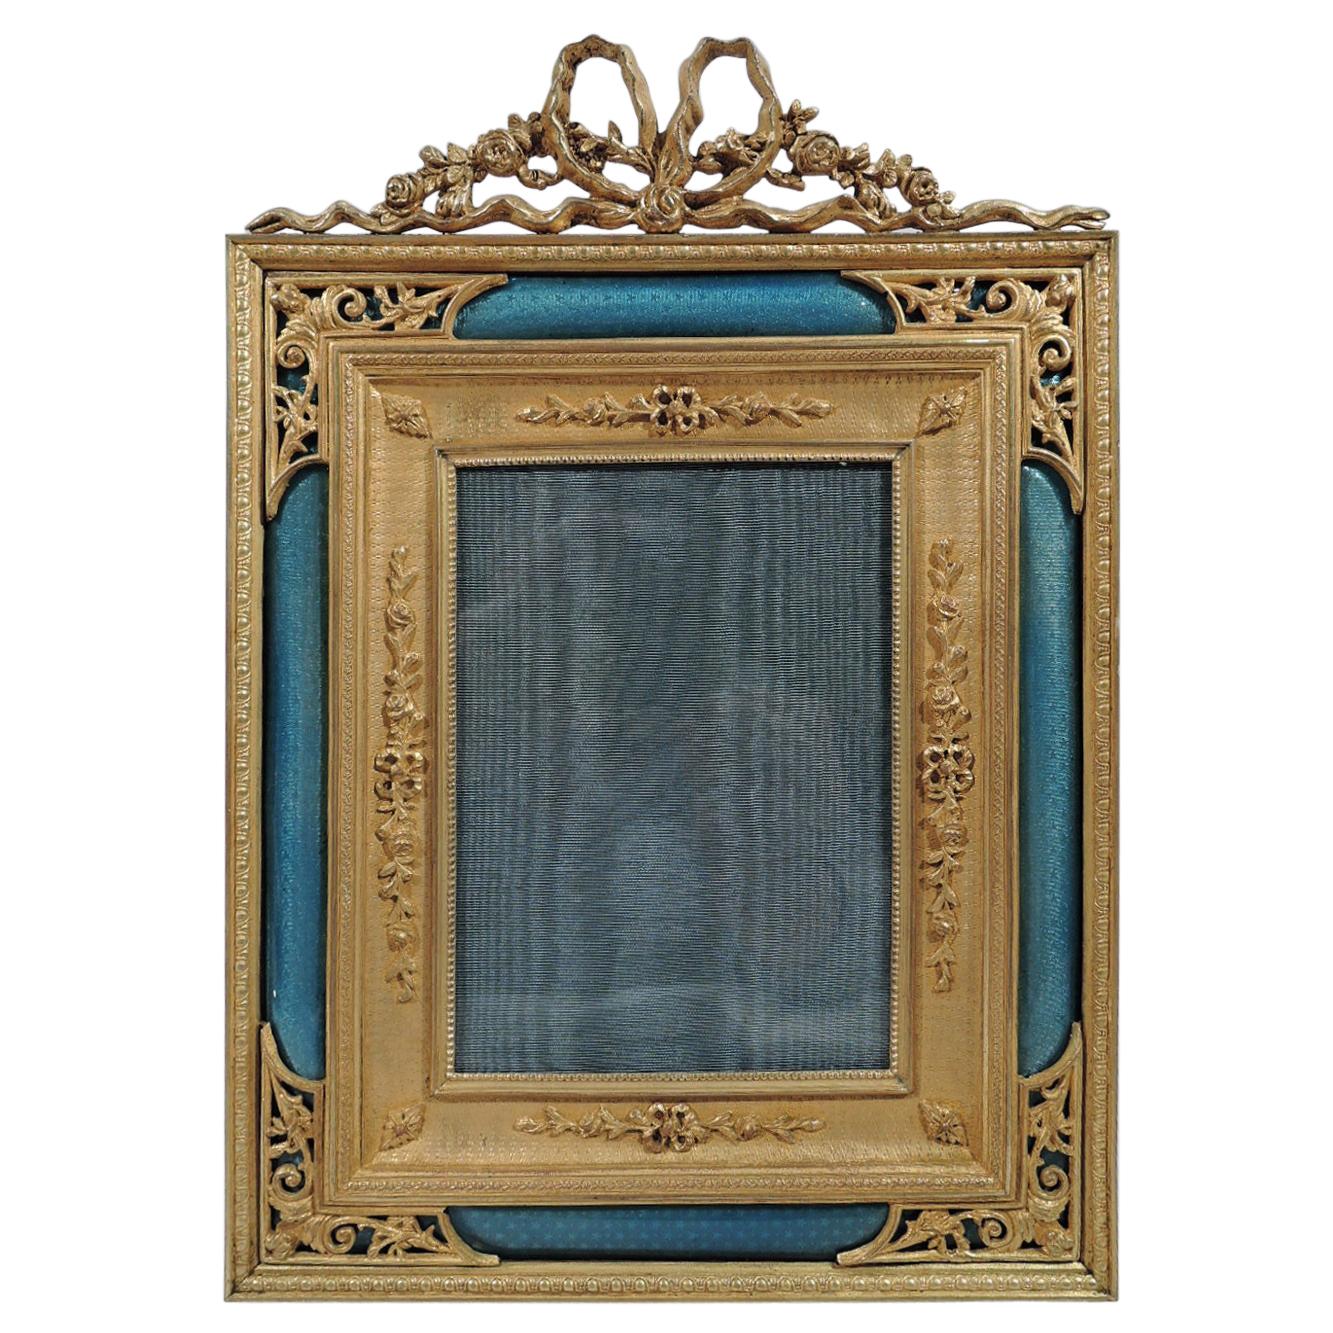 Antique French Rococo Revival Gilt Bronze and Blue Enamel Picture Frame